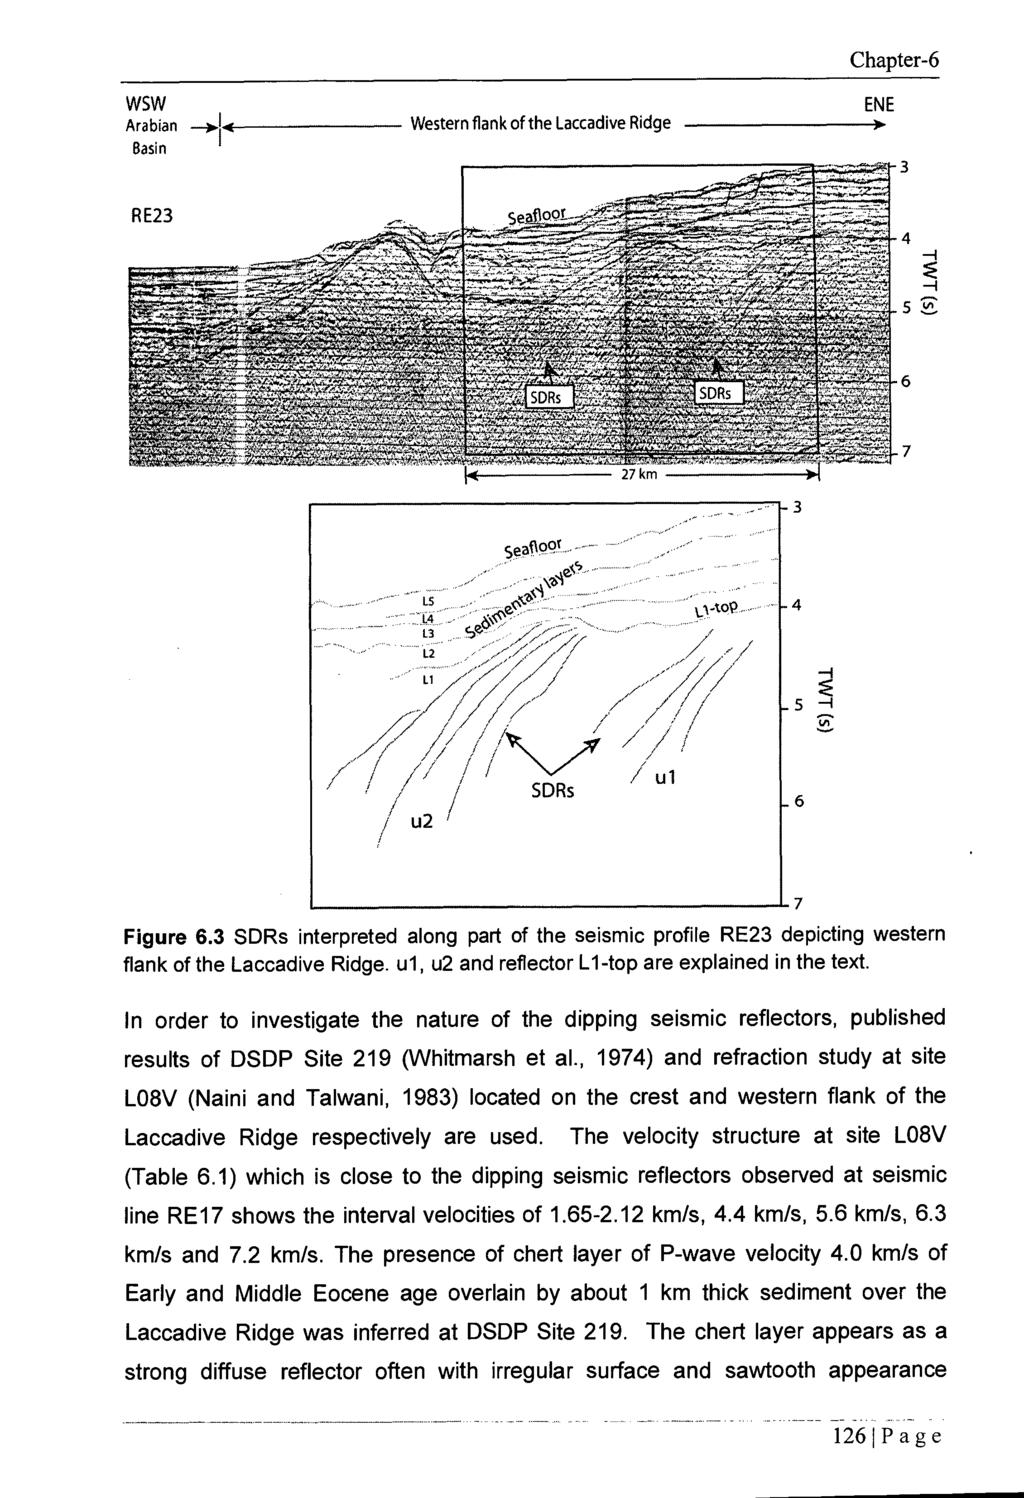 WSW Arabian Basin Western flank of the Laccadive Ridge Chapter-6 ENE Figure 6.3 SDRs interpreted along part of the seismic profile RE23 depicting western flank of the Laccadive Ridge.